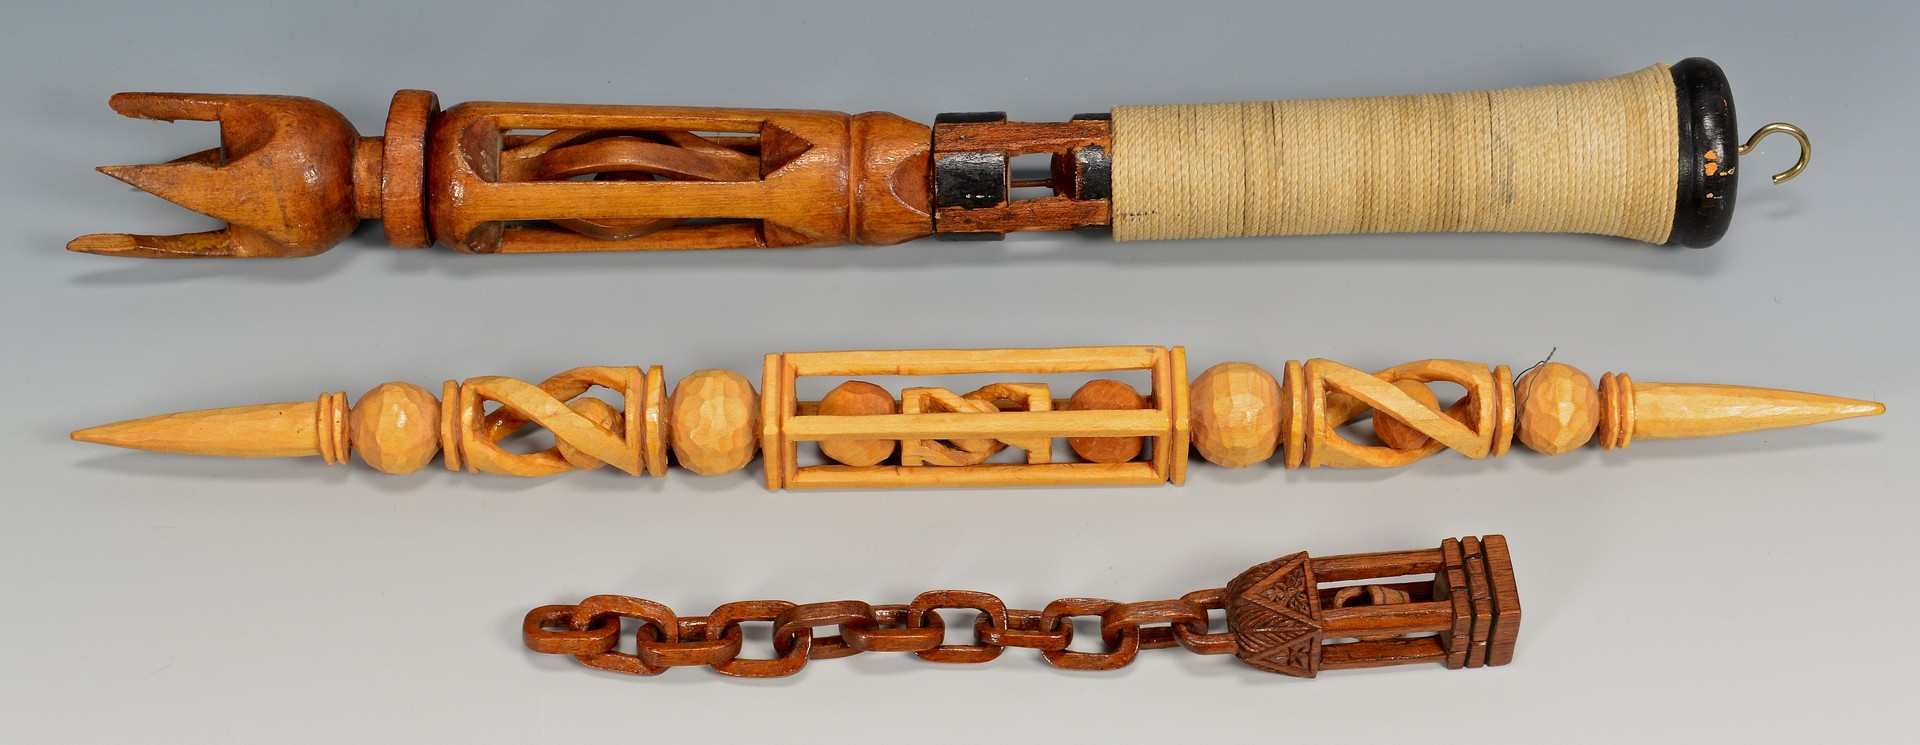 Lot 815: 6 Carved Folk Art Items, Canes & Chains